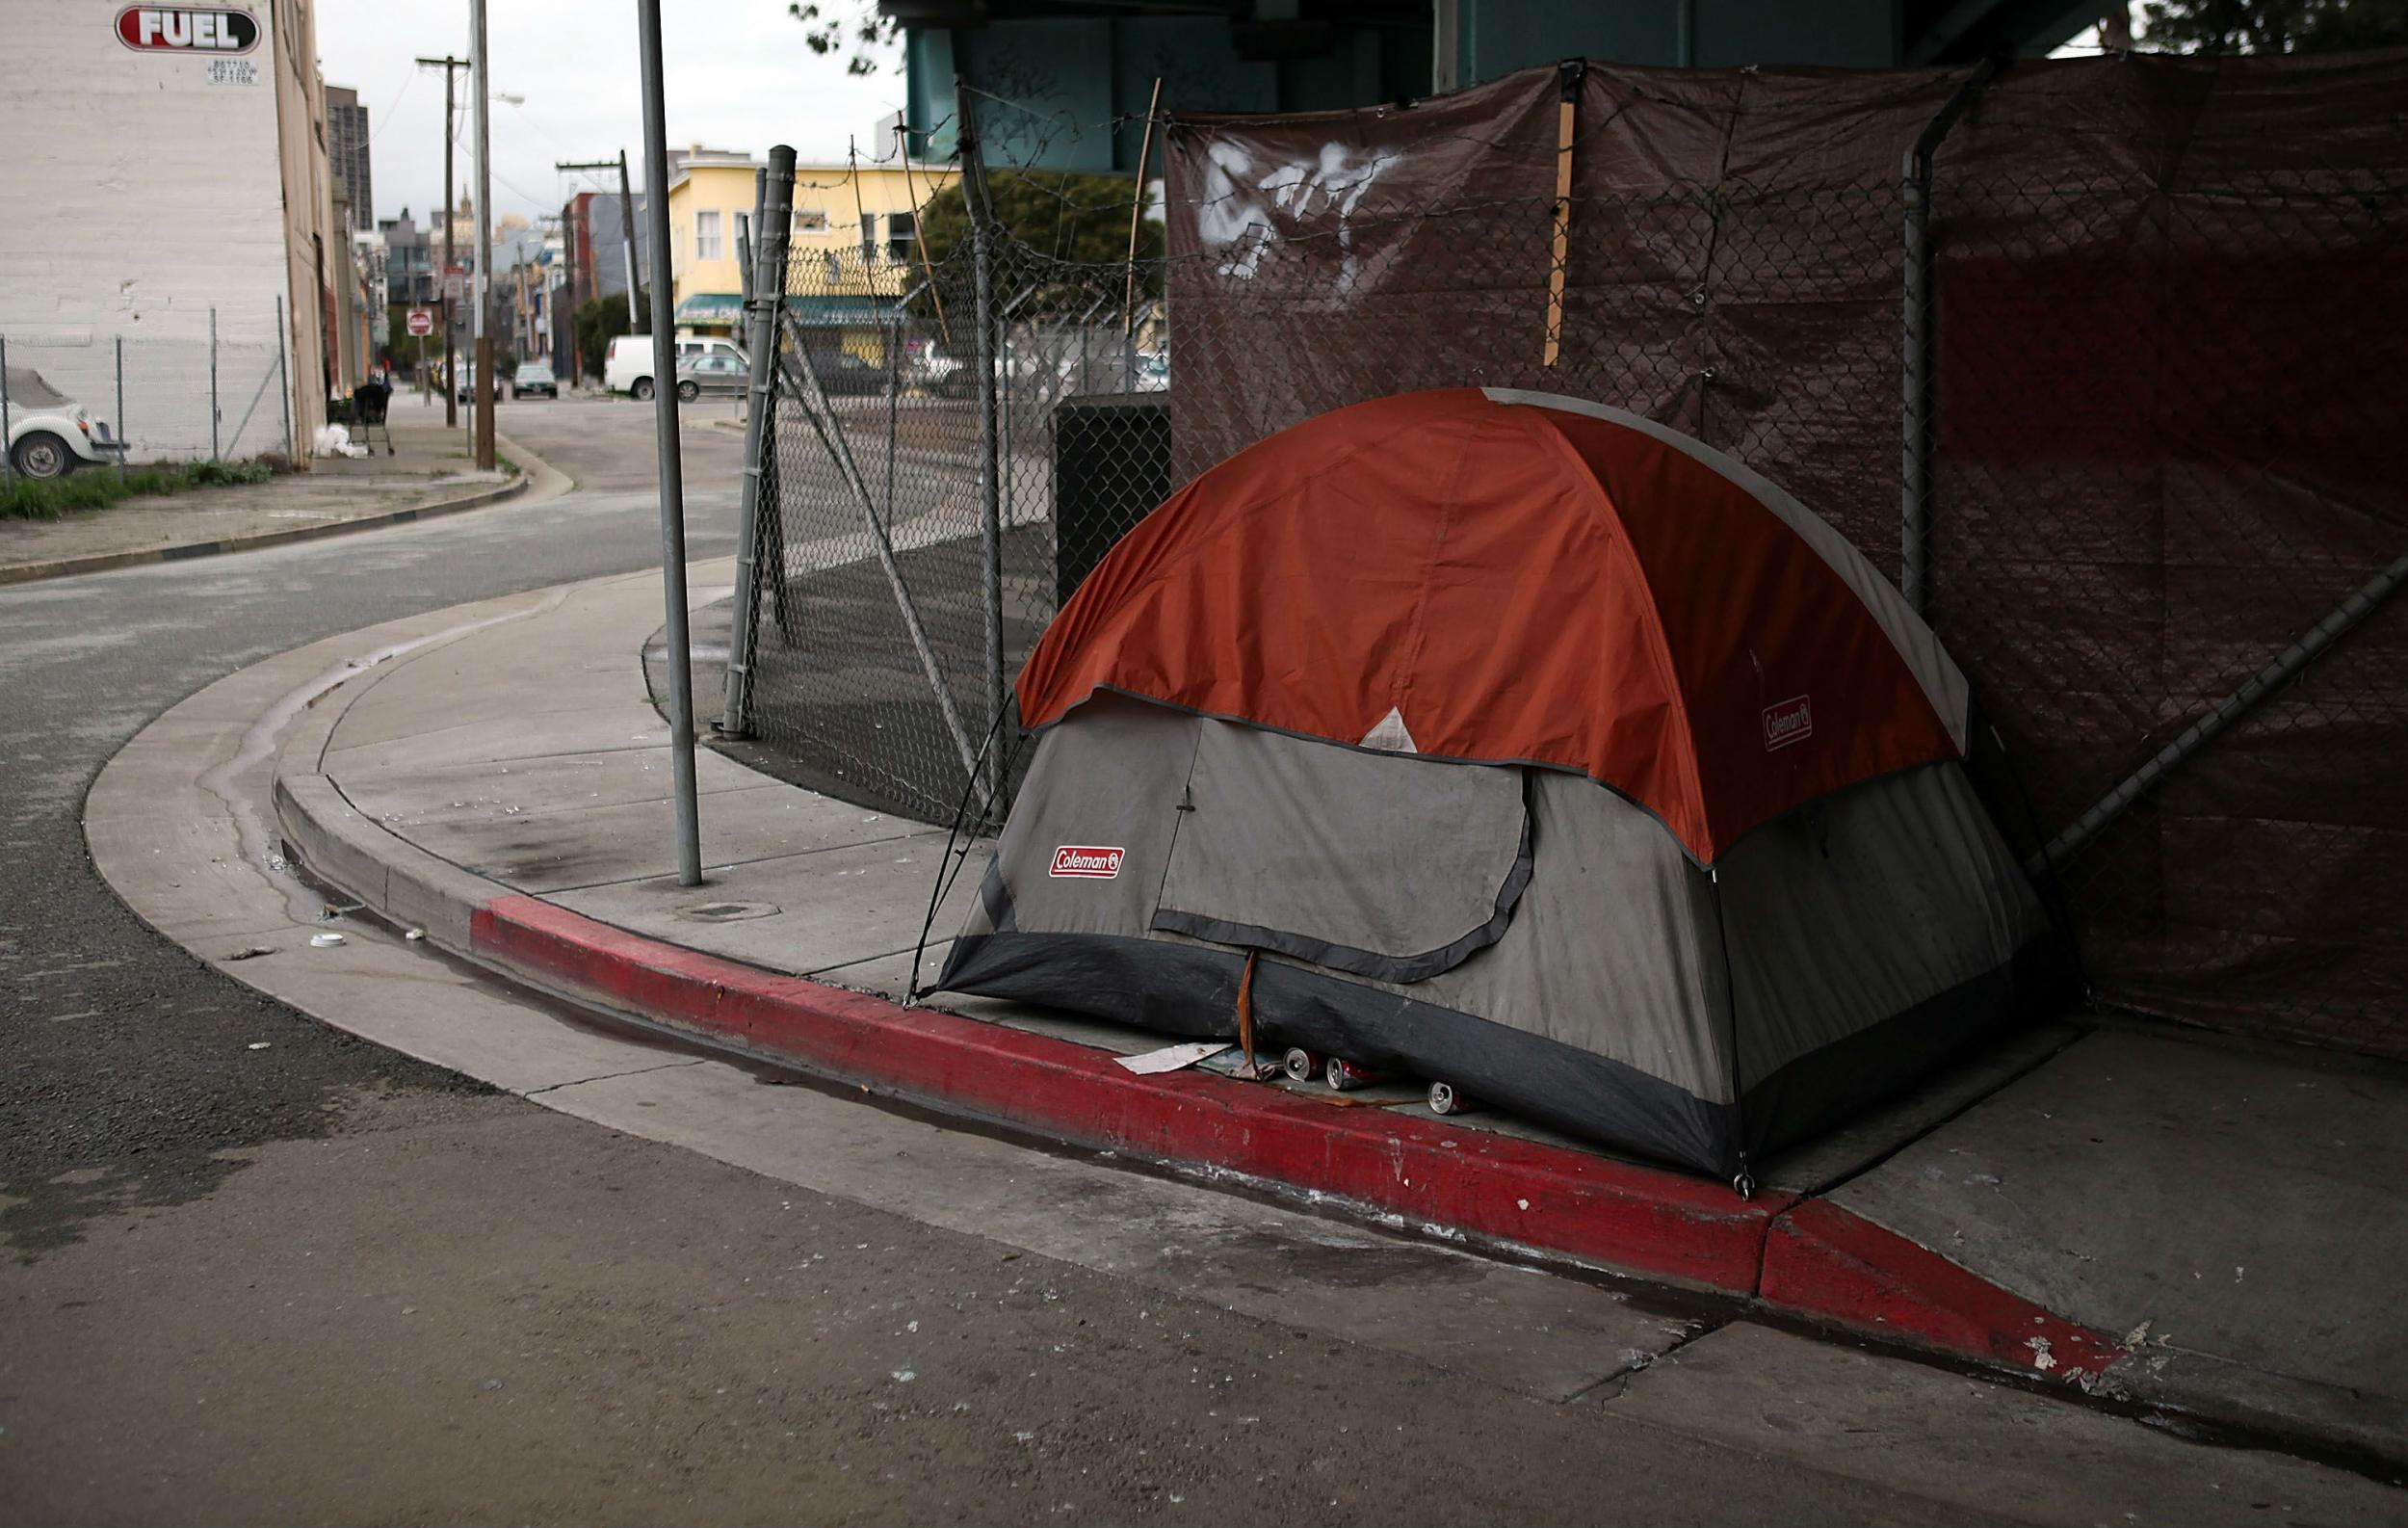 San Francisco Homeless Crisis Sparks Bitter Debate Over The Tents Lining Its Streets Americas